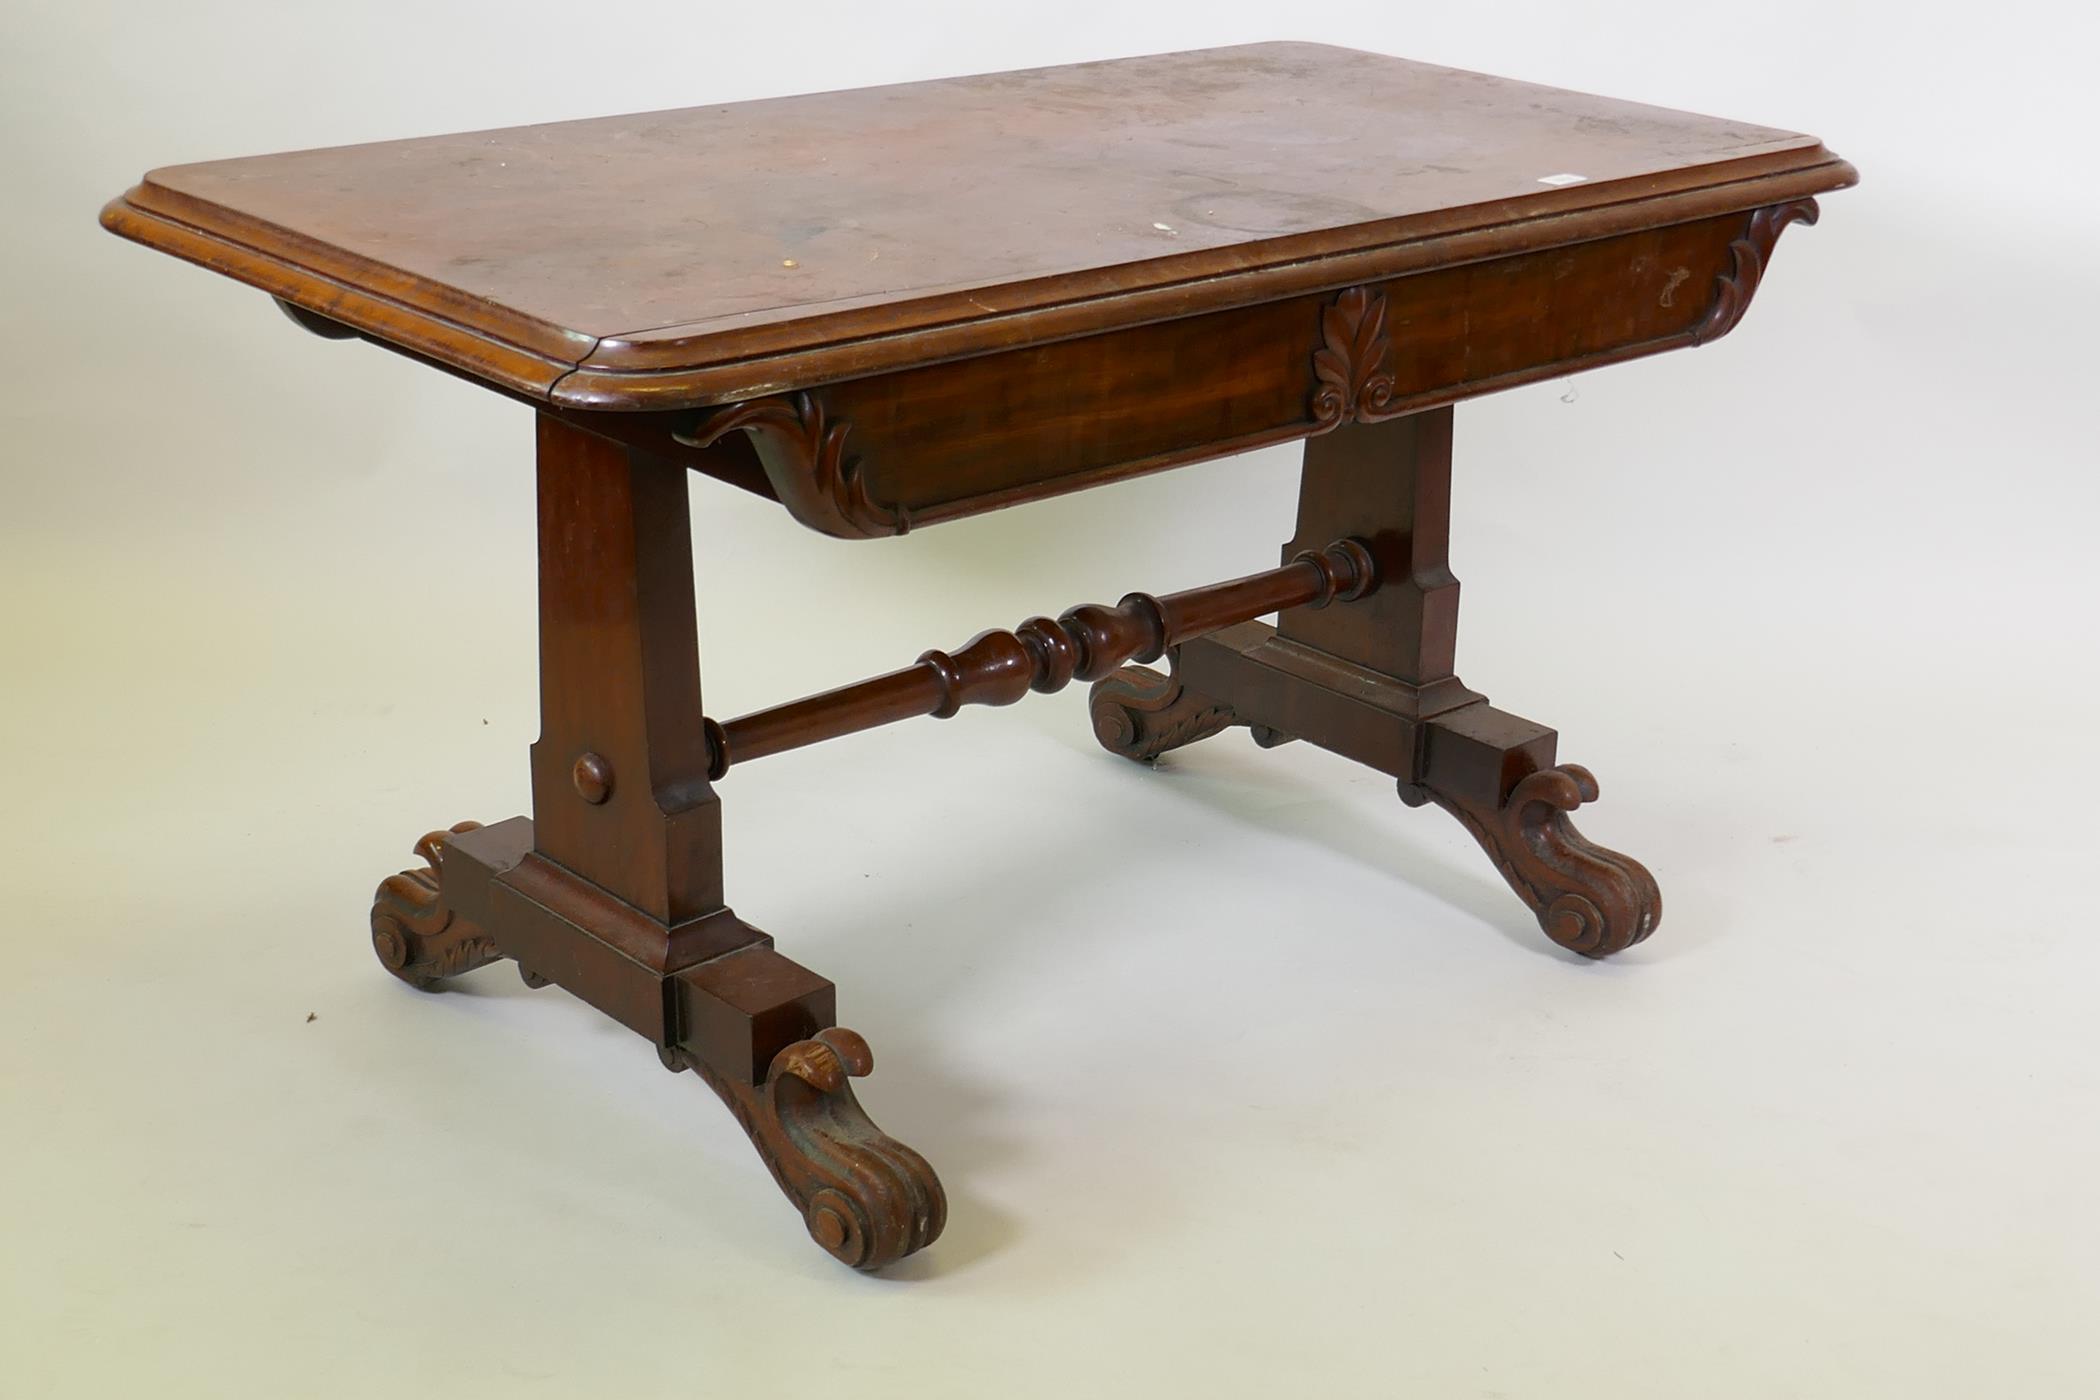 William IV mahogany centre table, raised on end supports with scroll feet, 130 x 70 x 70cm - Image 2 of 5